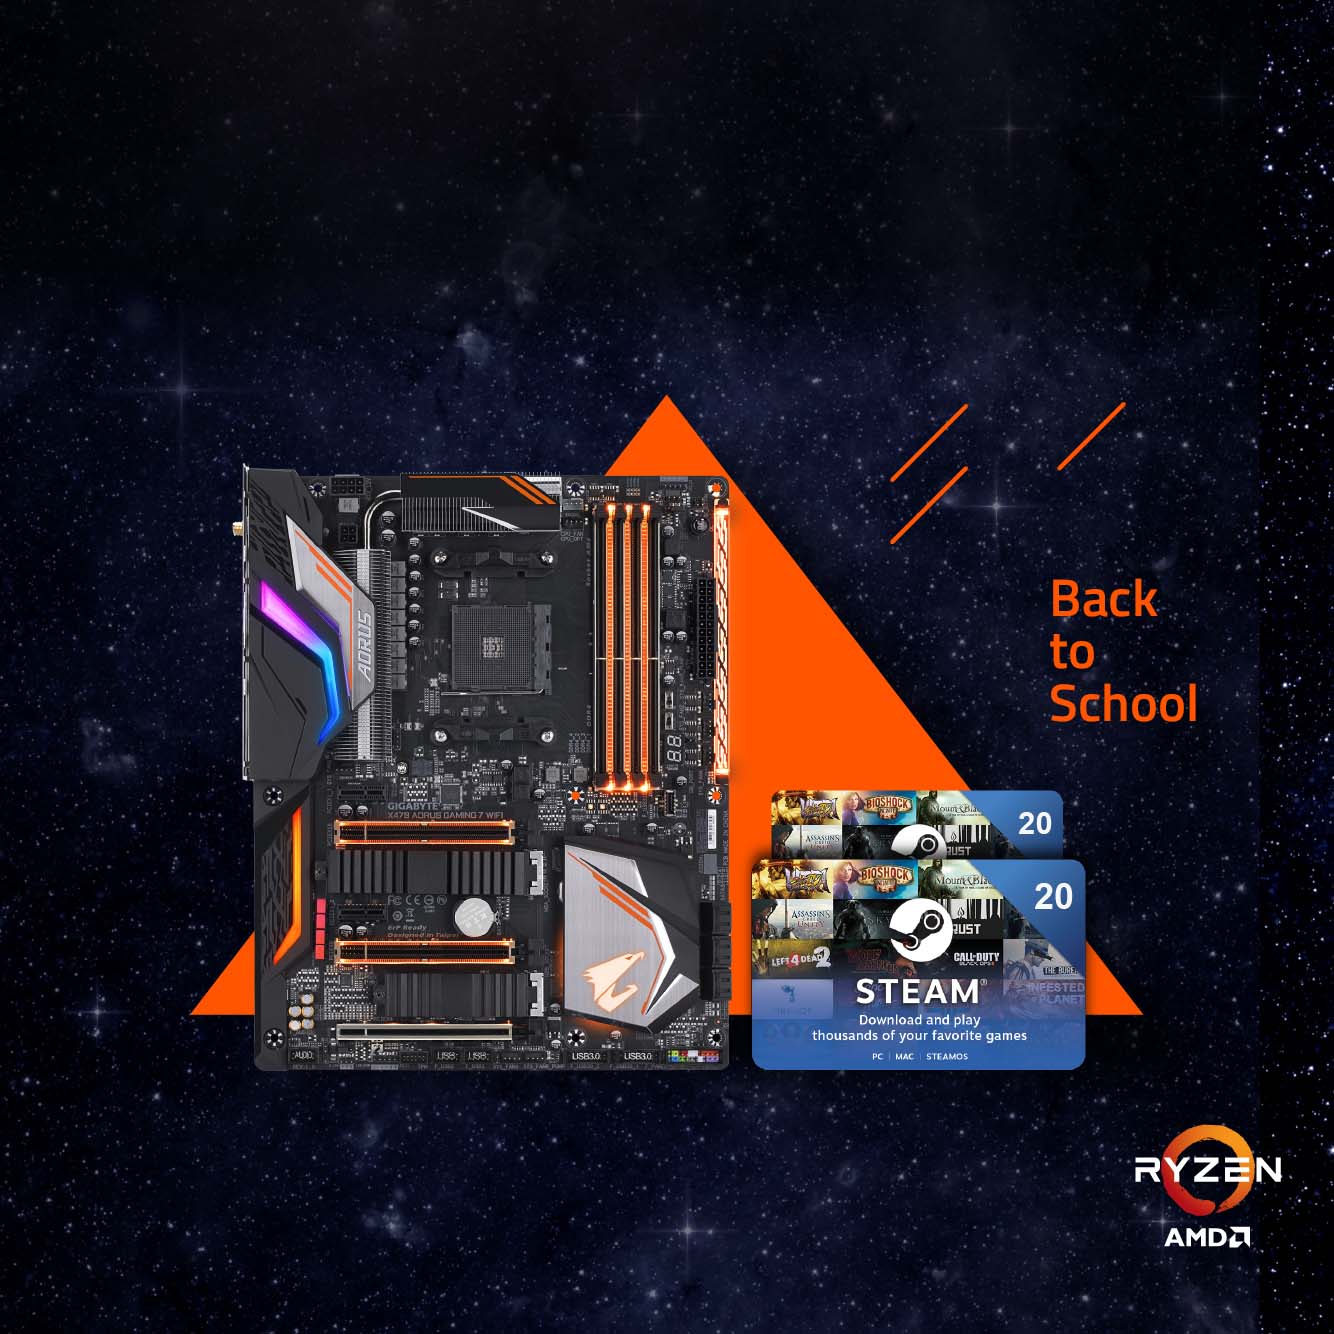 Back to School - Buy the latest GIGABYTE AM4 motherboards get up to €40 FREE STEAM wallet codes!